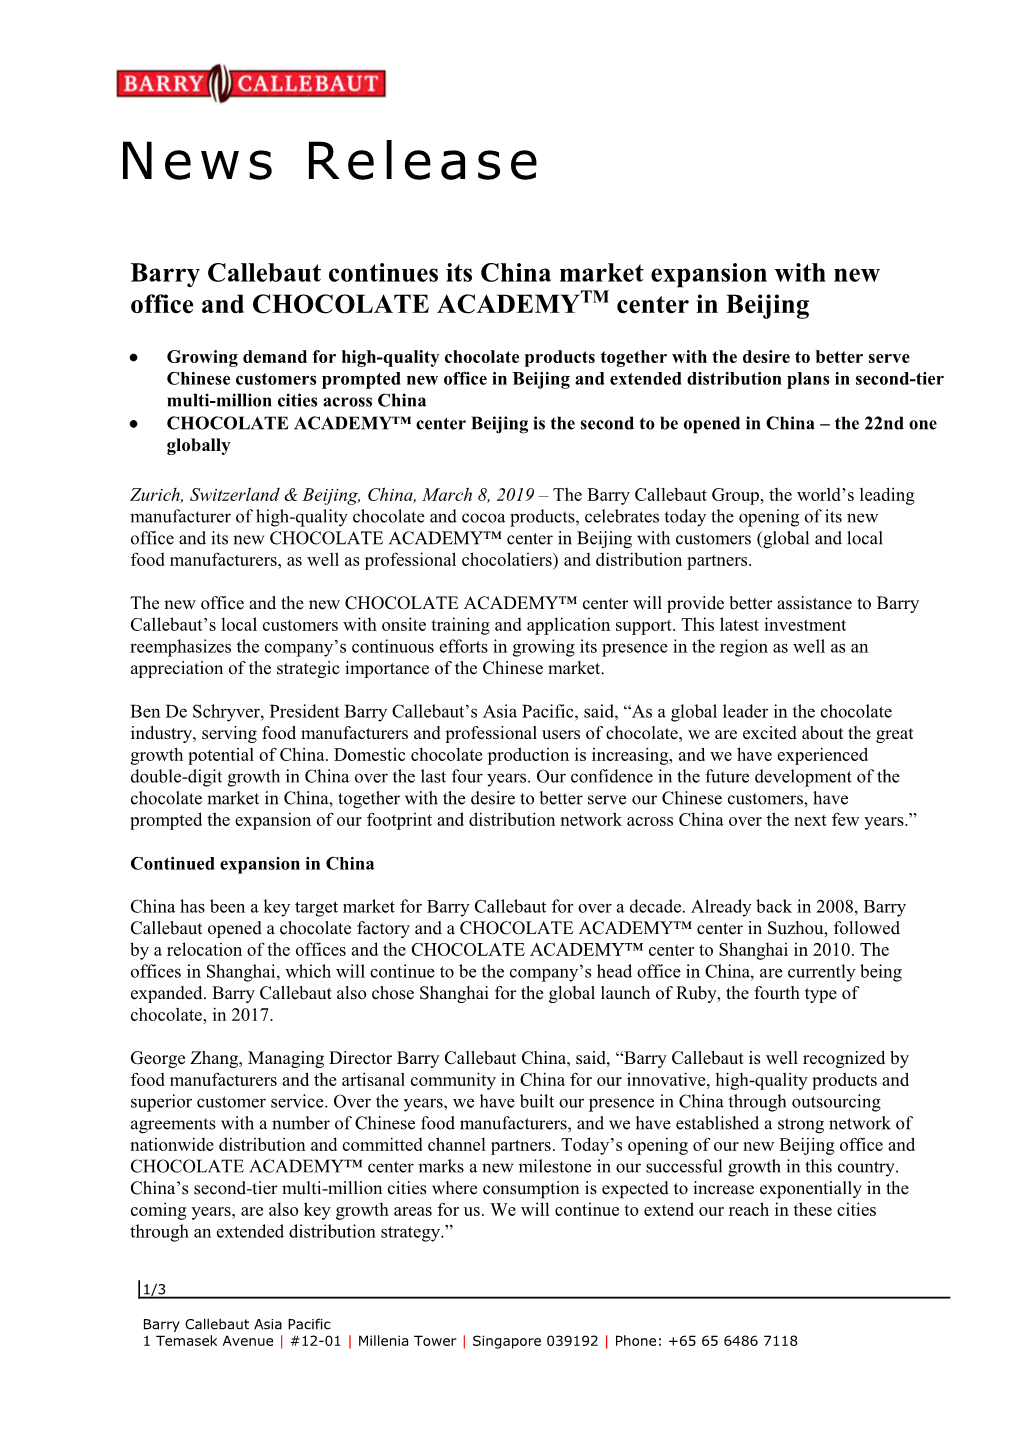 Barry Callebaut Continues Its China Market Expansion with New Office and CHOCOLATE ACADEMYTM Center in Beijing